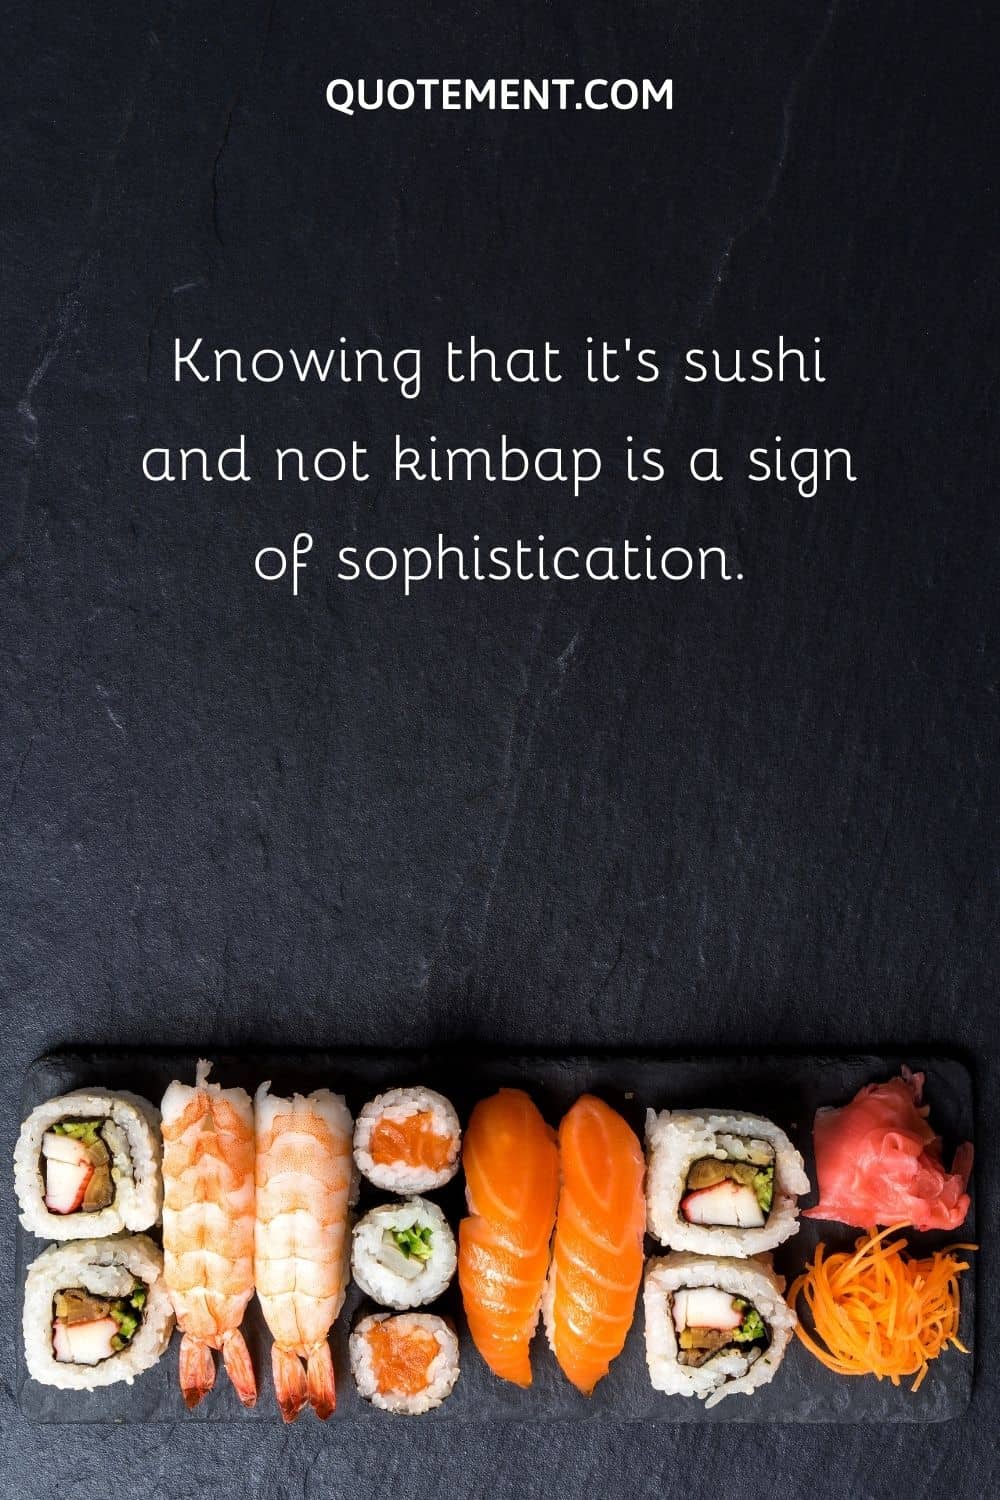 Knowing that it's sushi and not kimbap is a sign of sophistication.